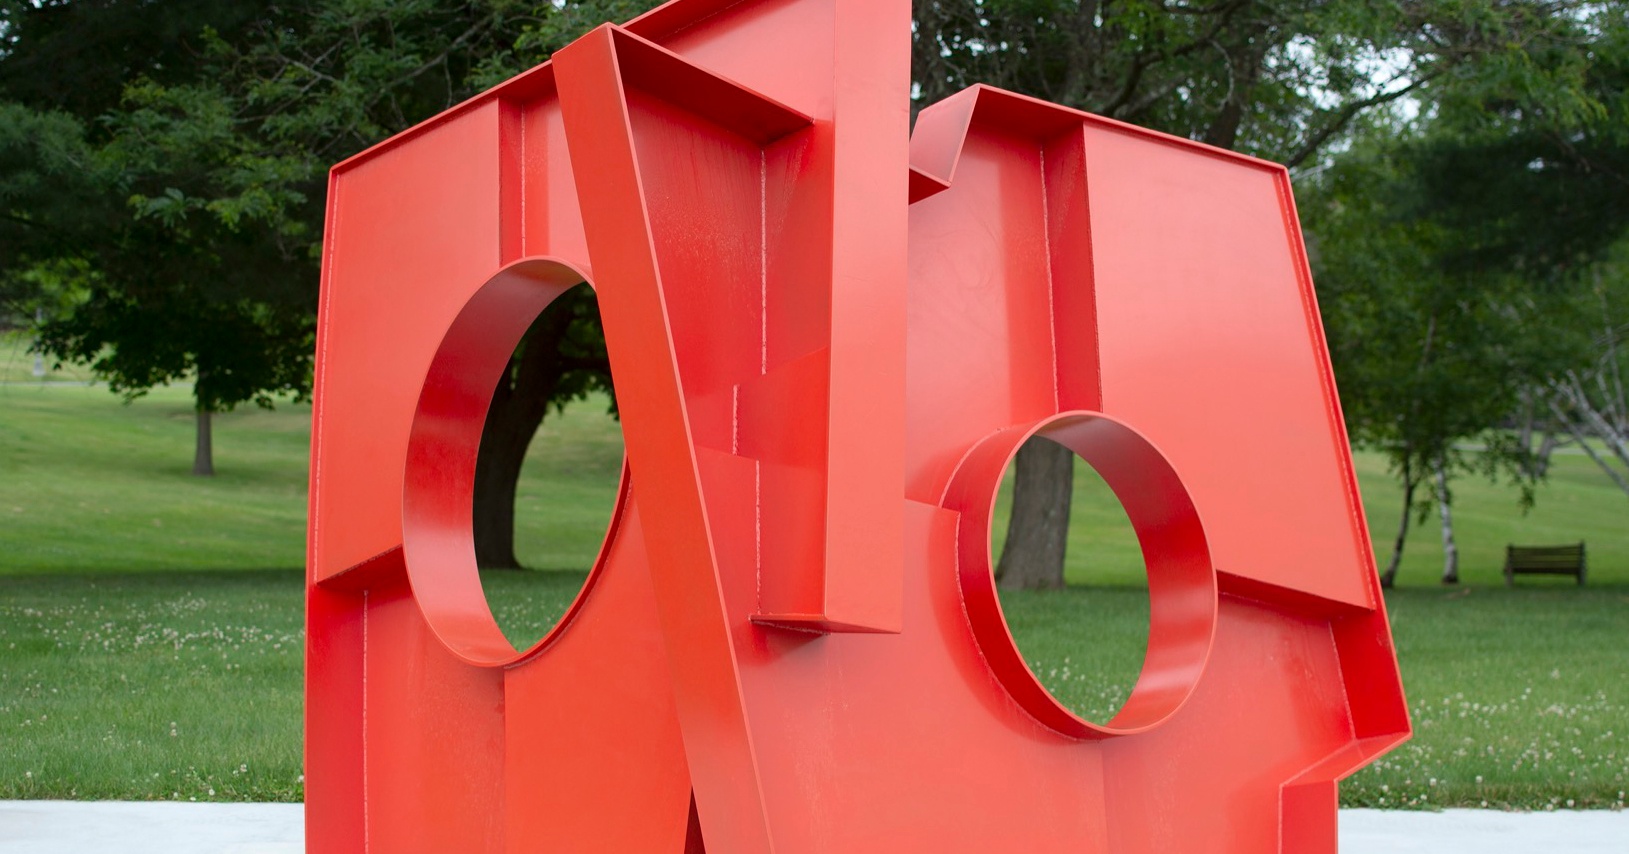 A large red sculpture of two rectangular shapes conjoined at an angle with large holes in the middle of each plane sits on a concrete slab in a grassy field with trees.